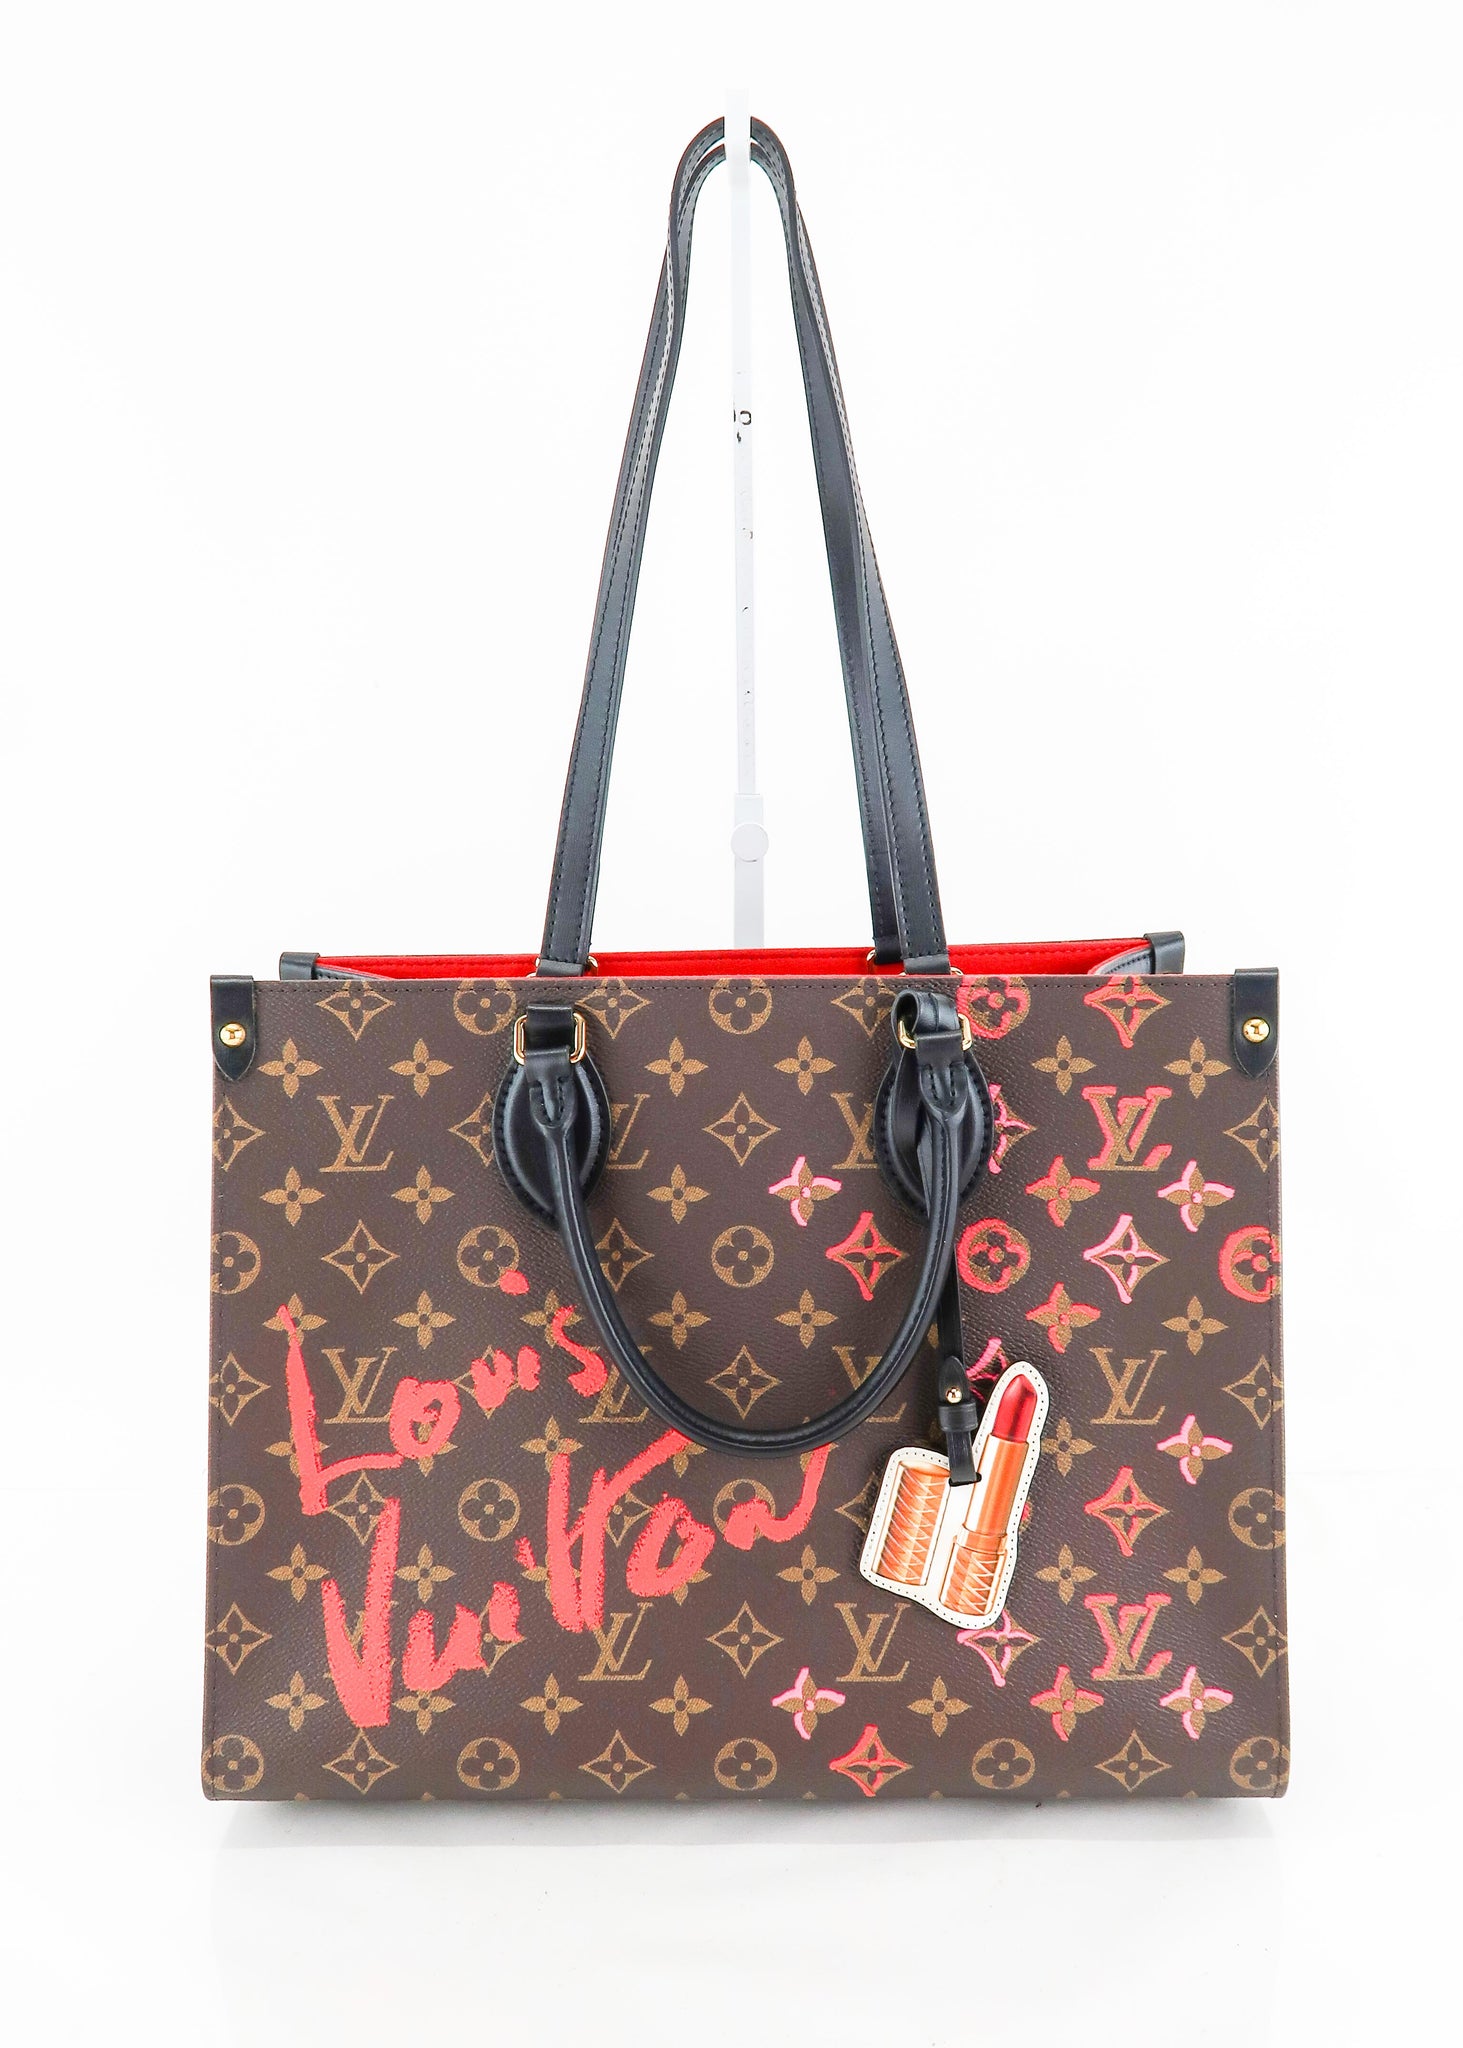 In LVoe with Louis Vuitton: Who Could It Be?